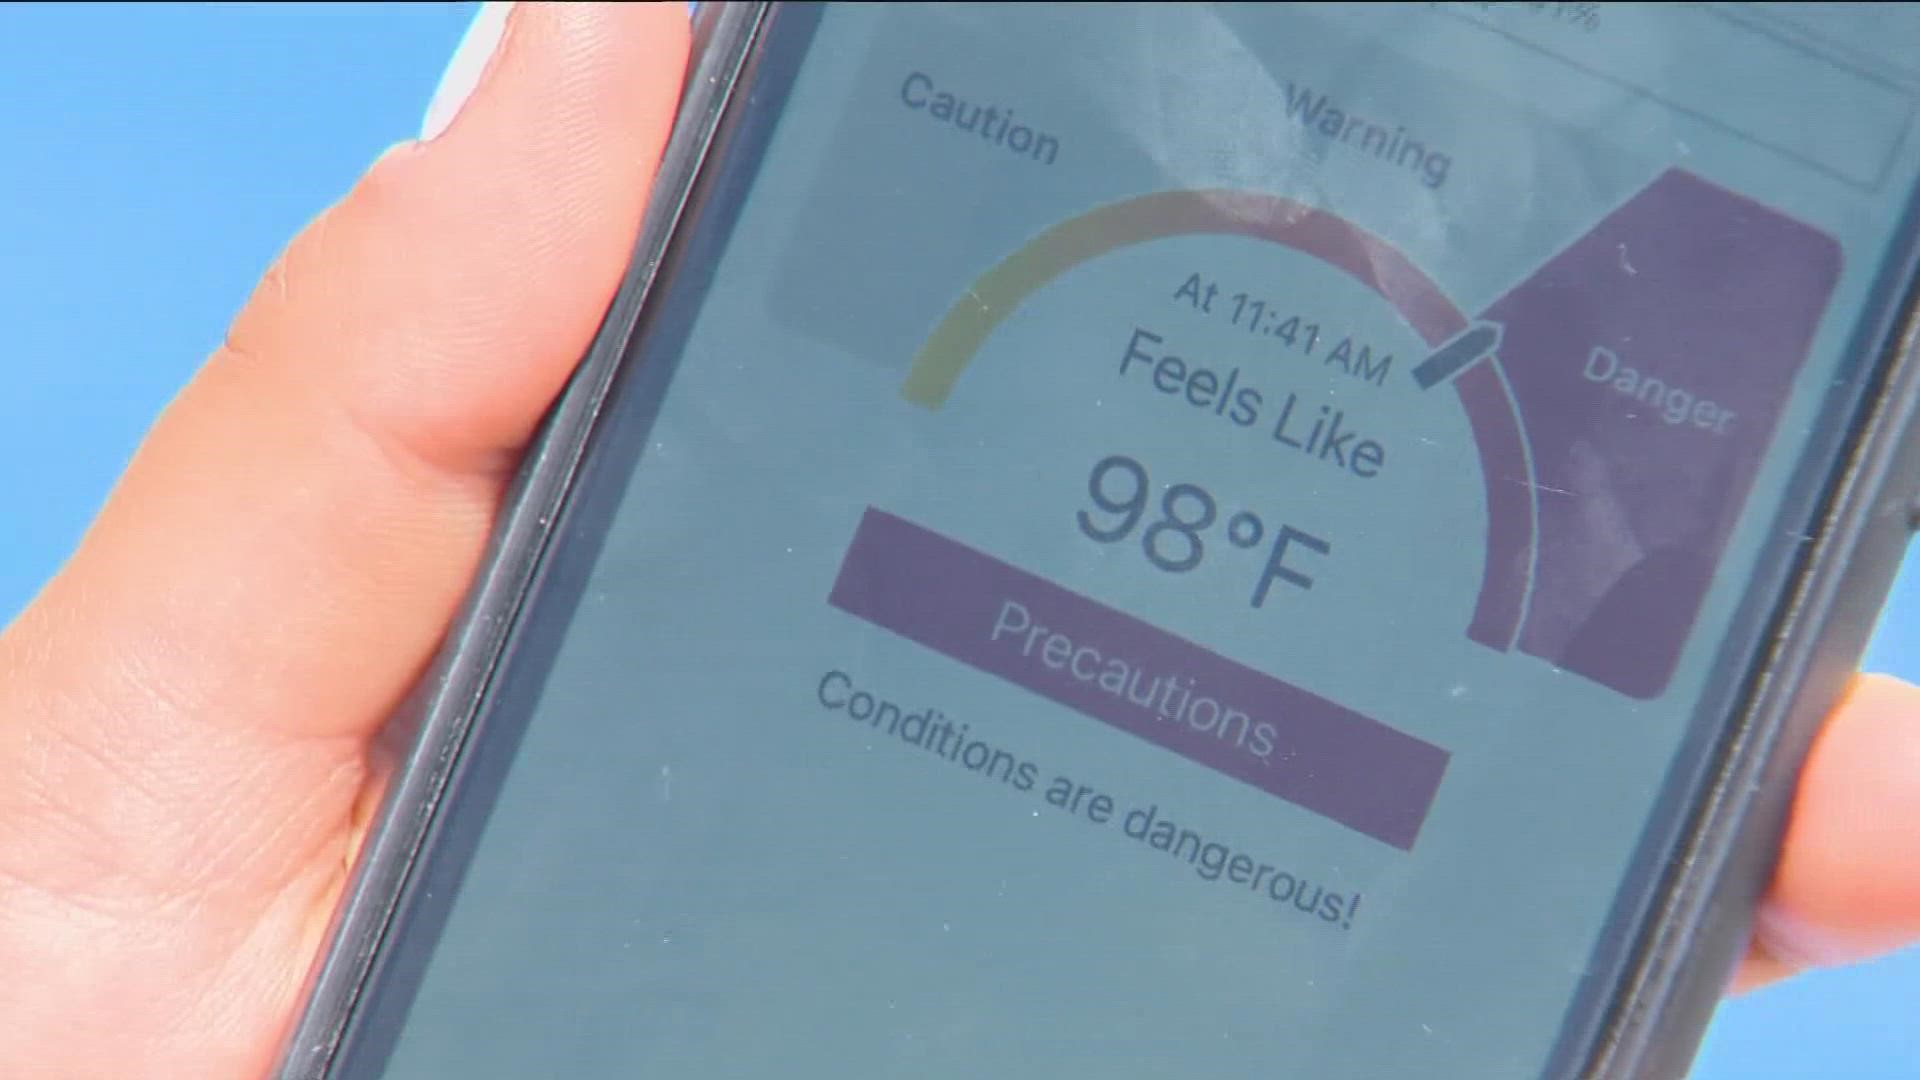 The app allows workers and supervisors to calculate the "feels like" temperatures for their worksite. It also gives them tips on how to beat heat-related illnesses.